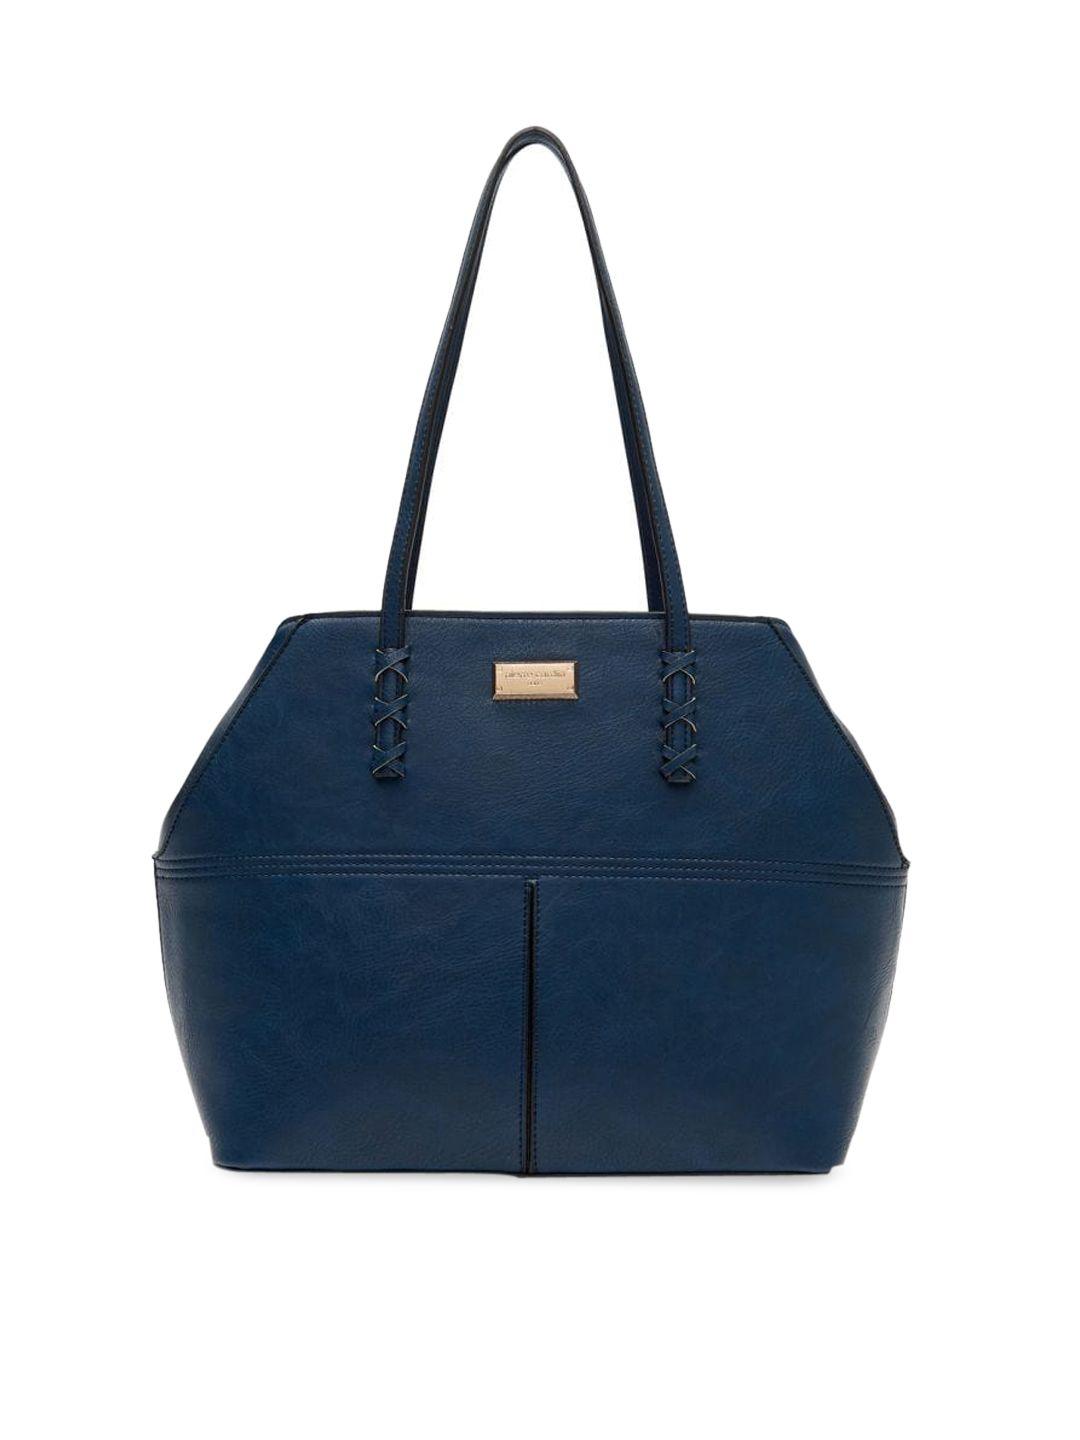 pierre cardin navy blue textured tote bag